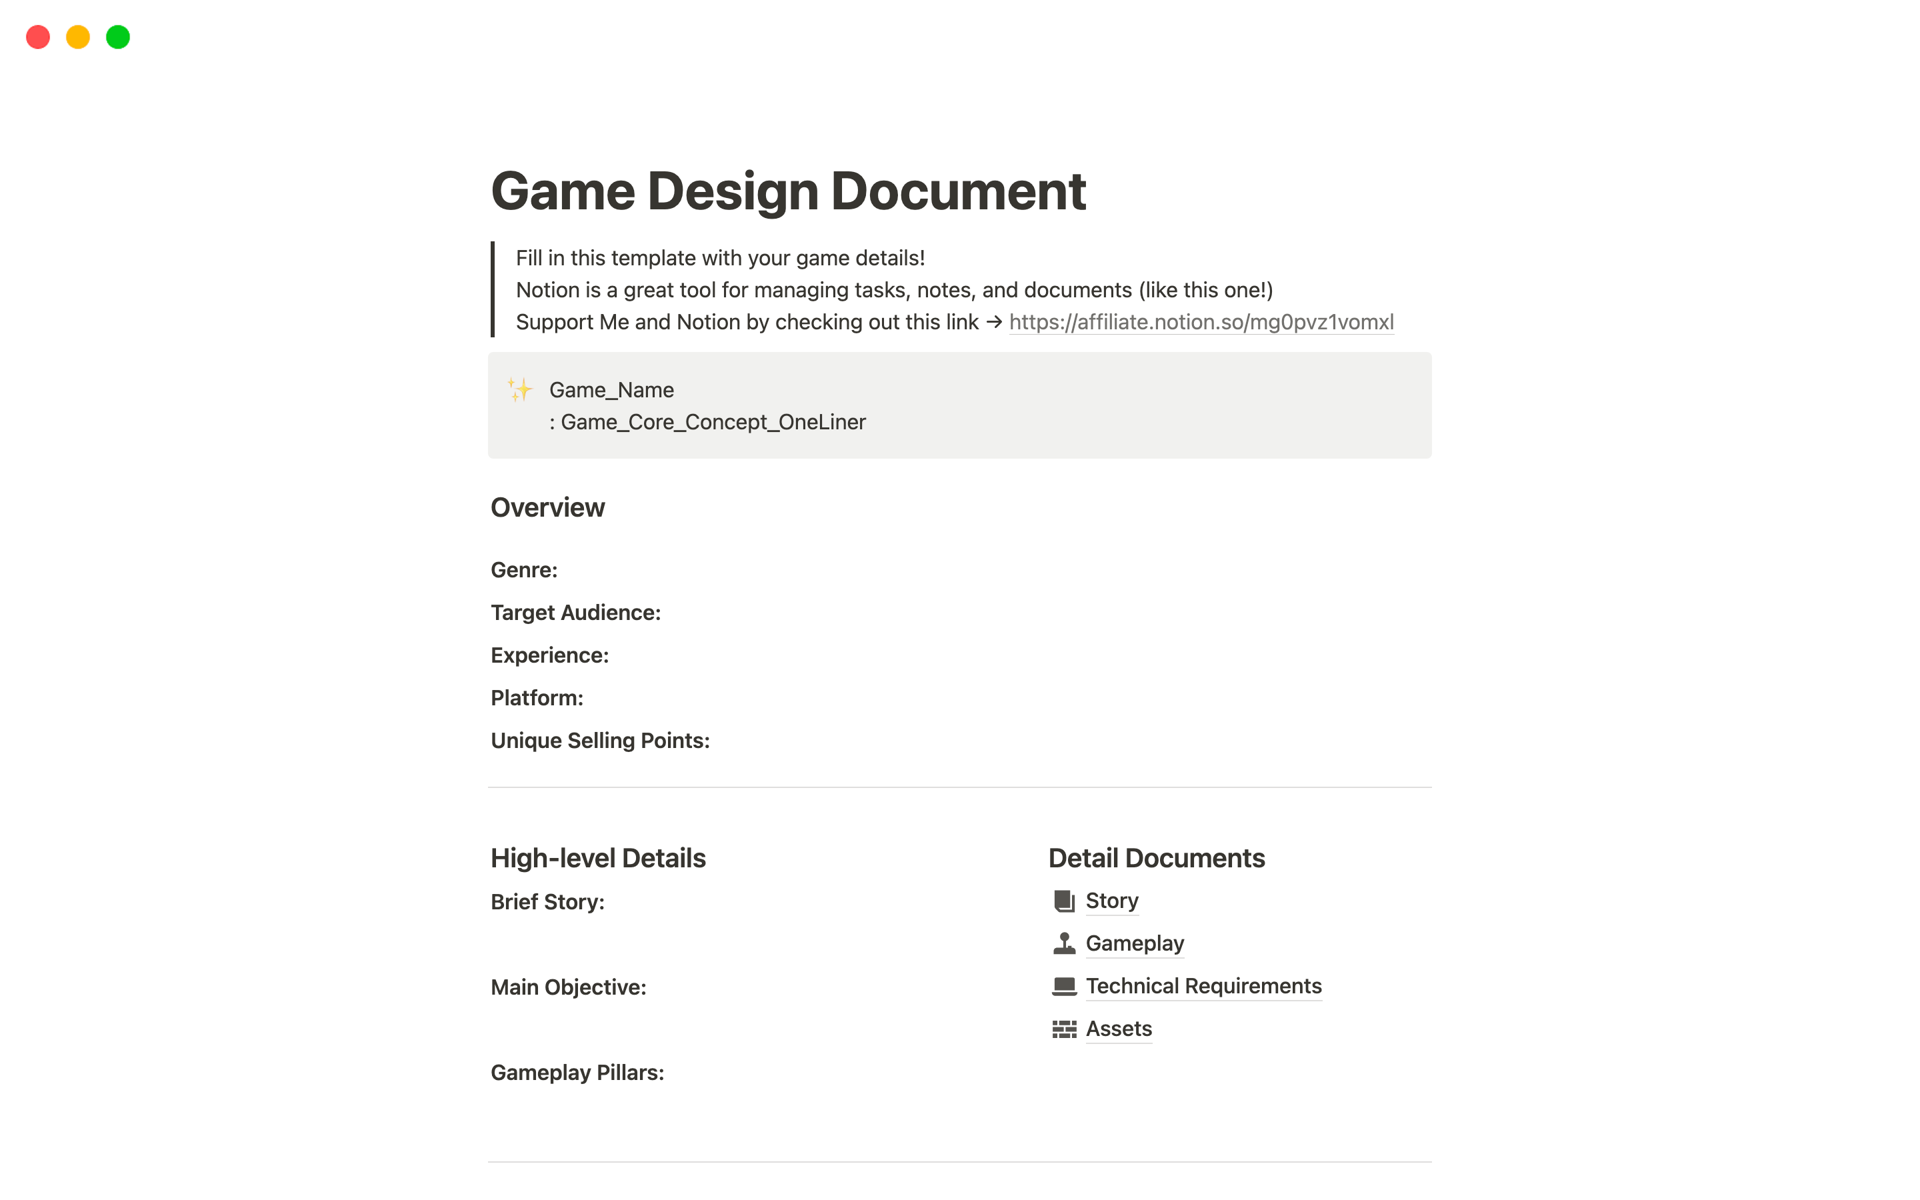 Get your game development team on board with a game design document